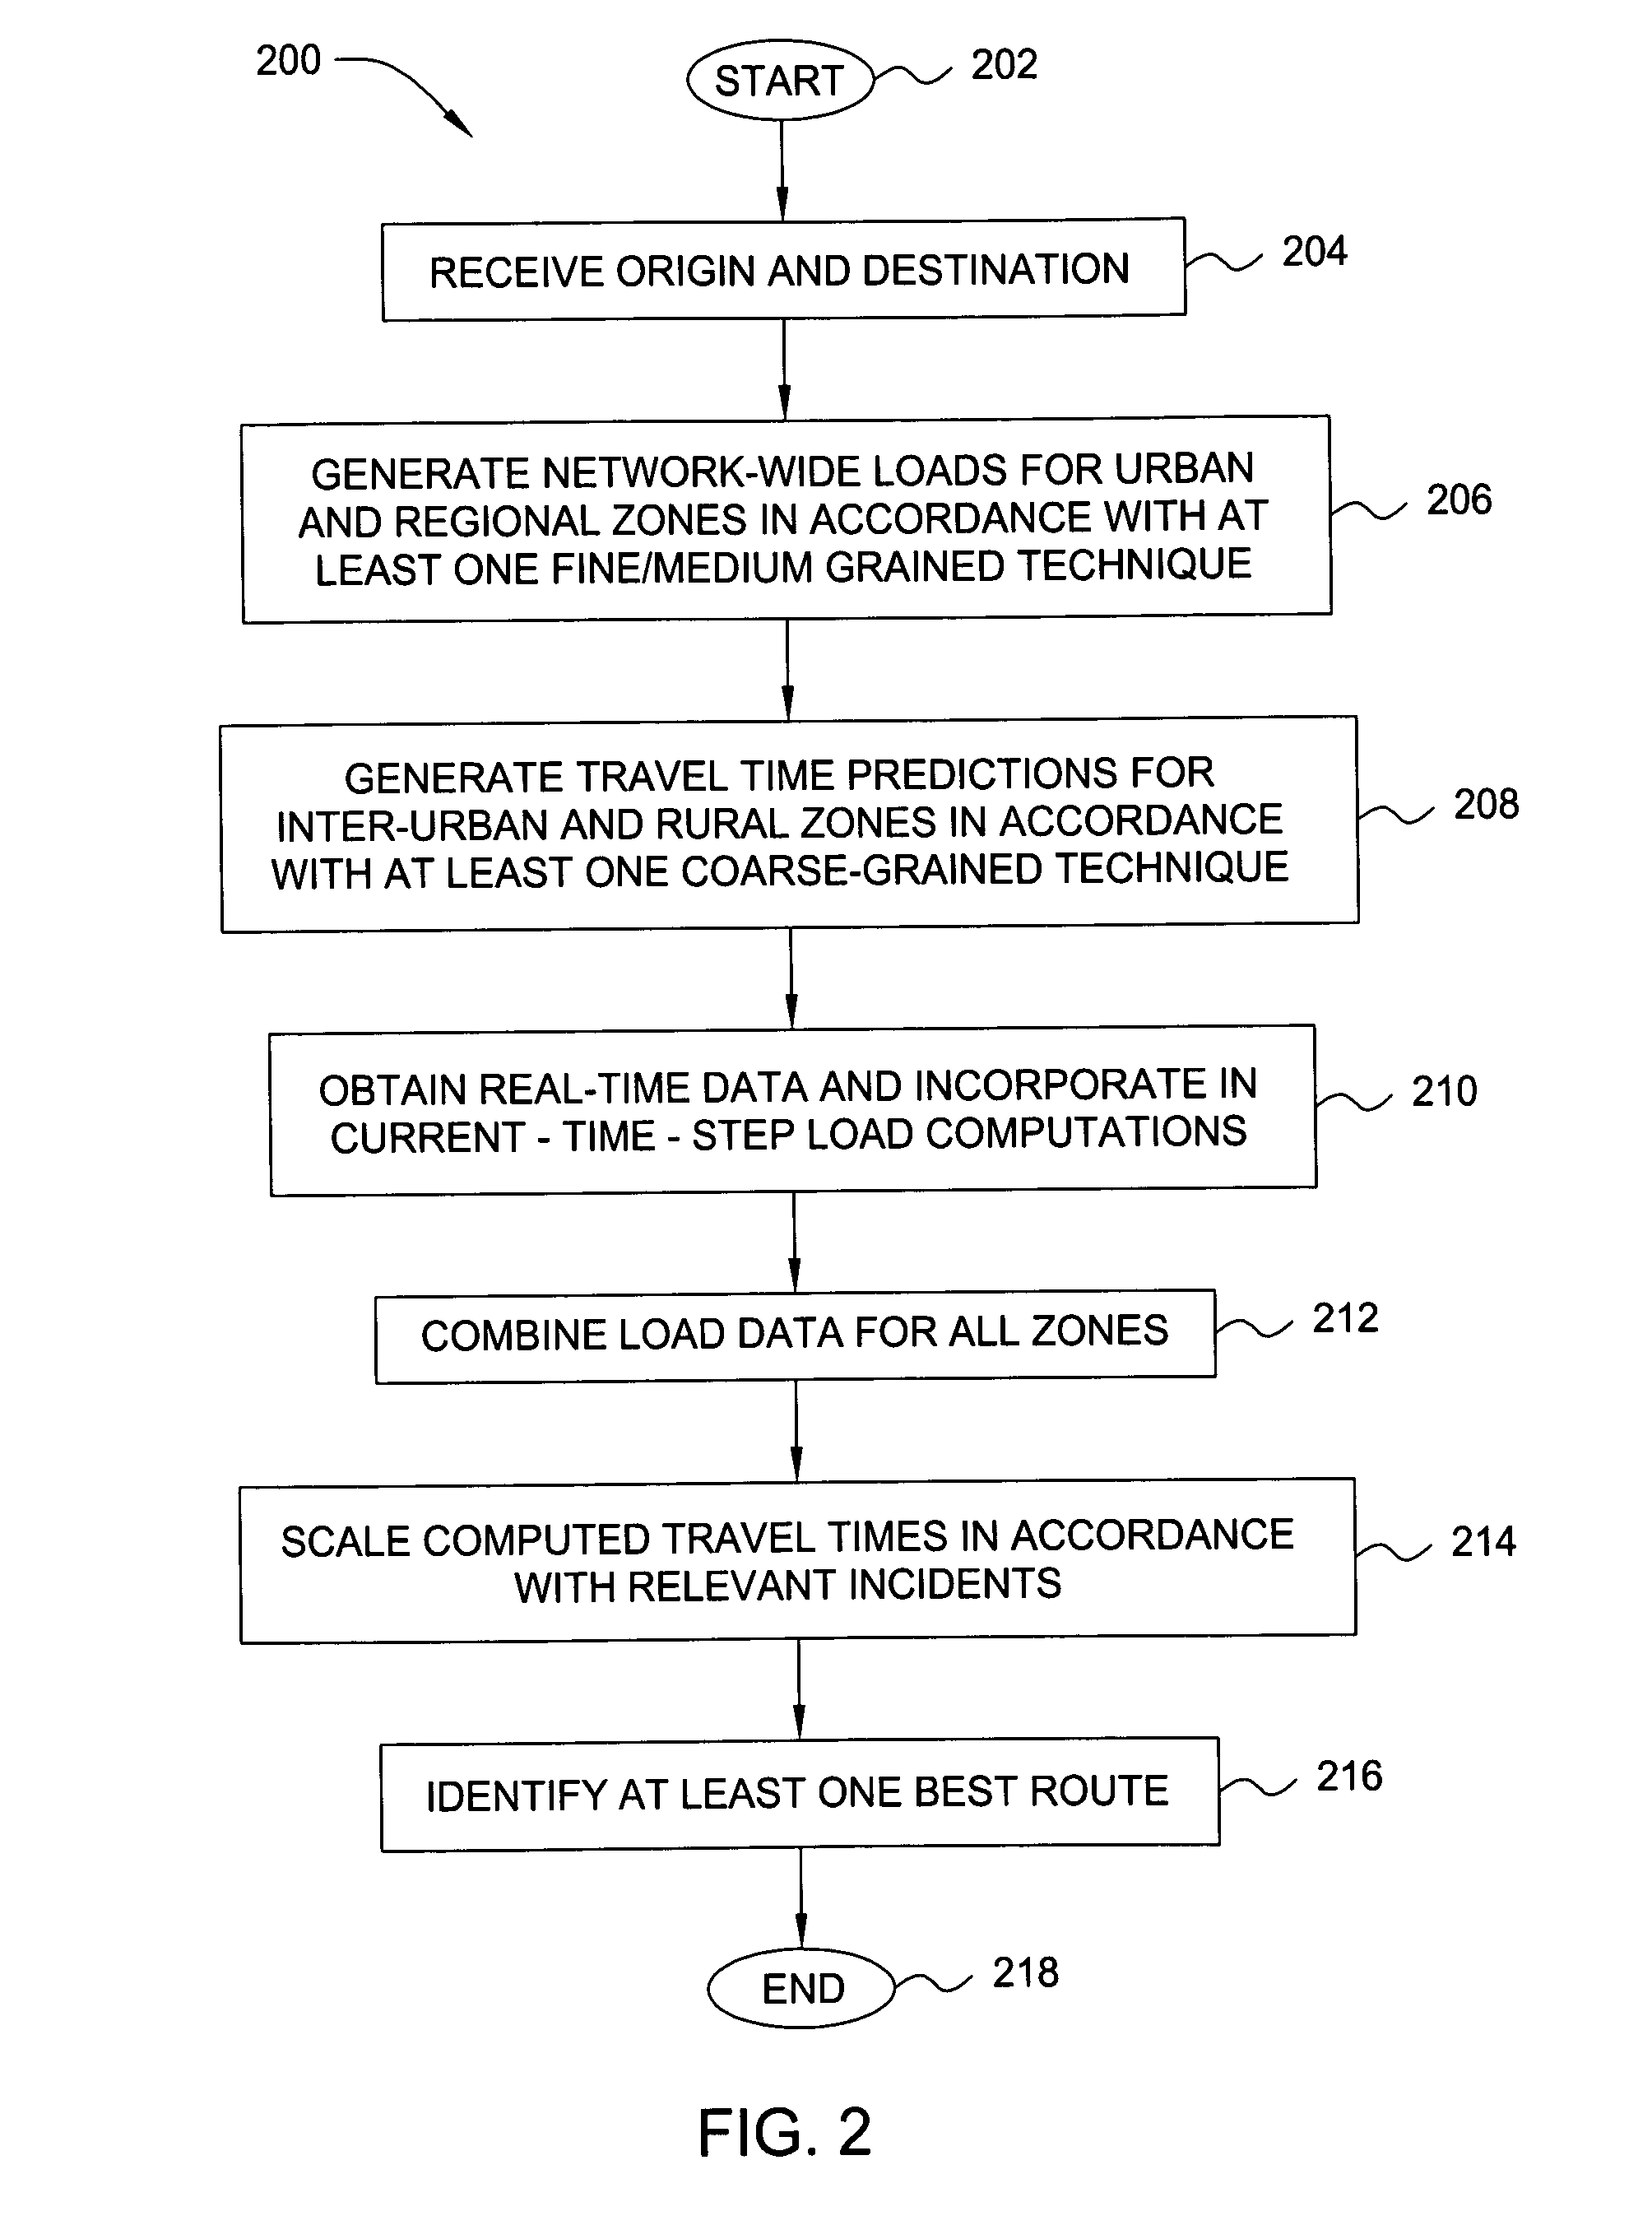 Method and apparatus for end-to-end travel time estimation using dynamic traffic data